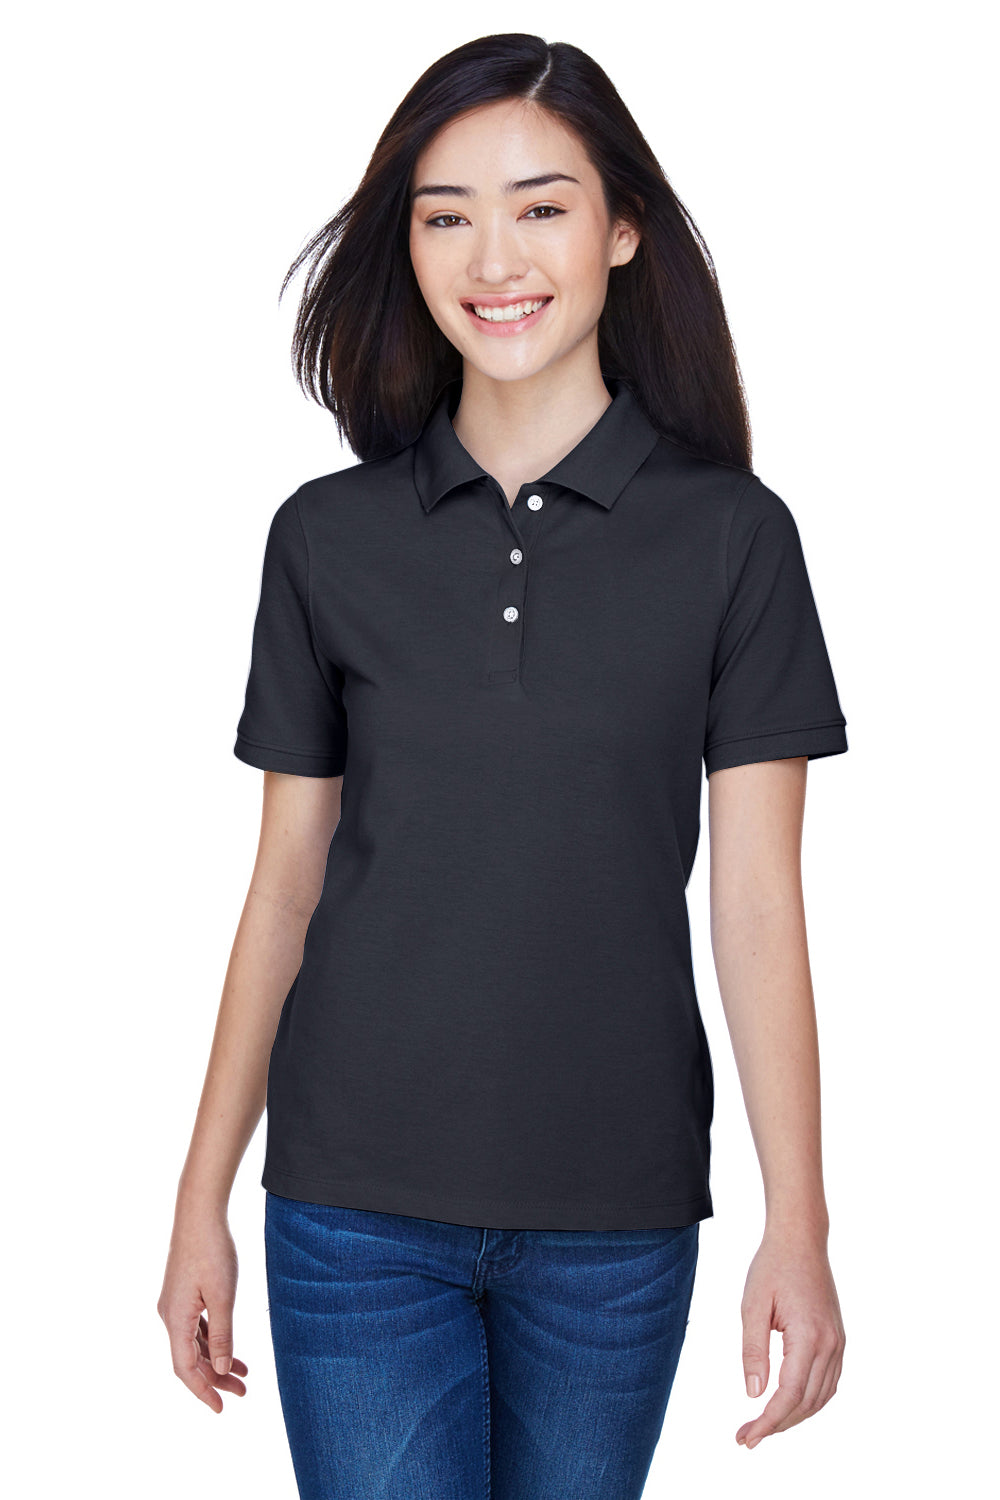 Harriton M265W Womens Easy Blend Wrinkle Resistant Short Sleeve Polo Shirt Navy Blue Front